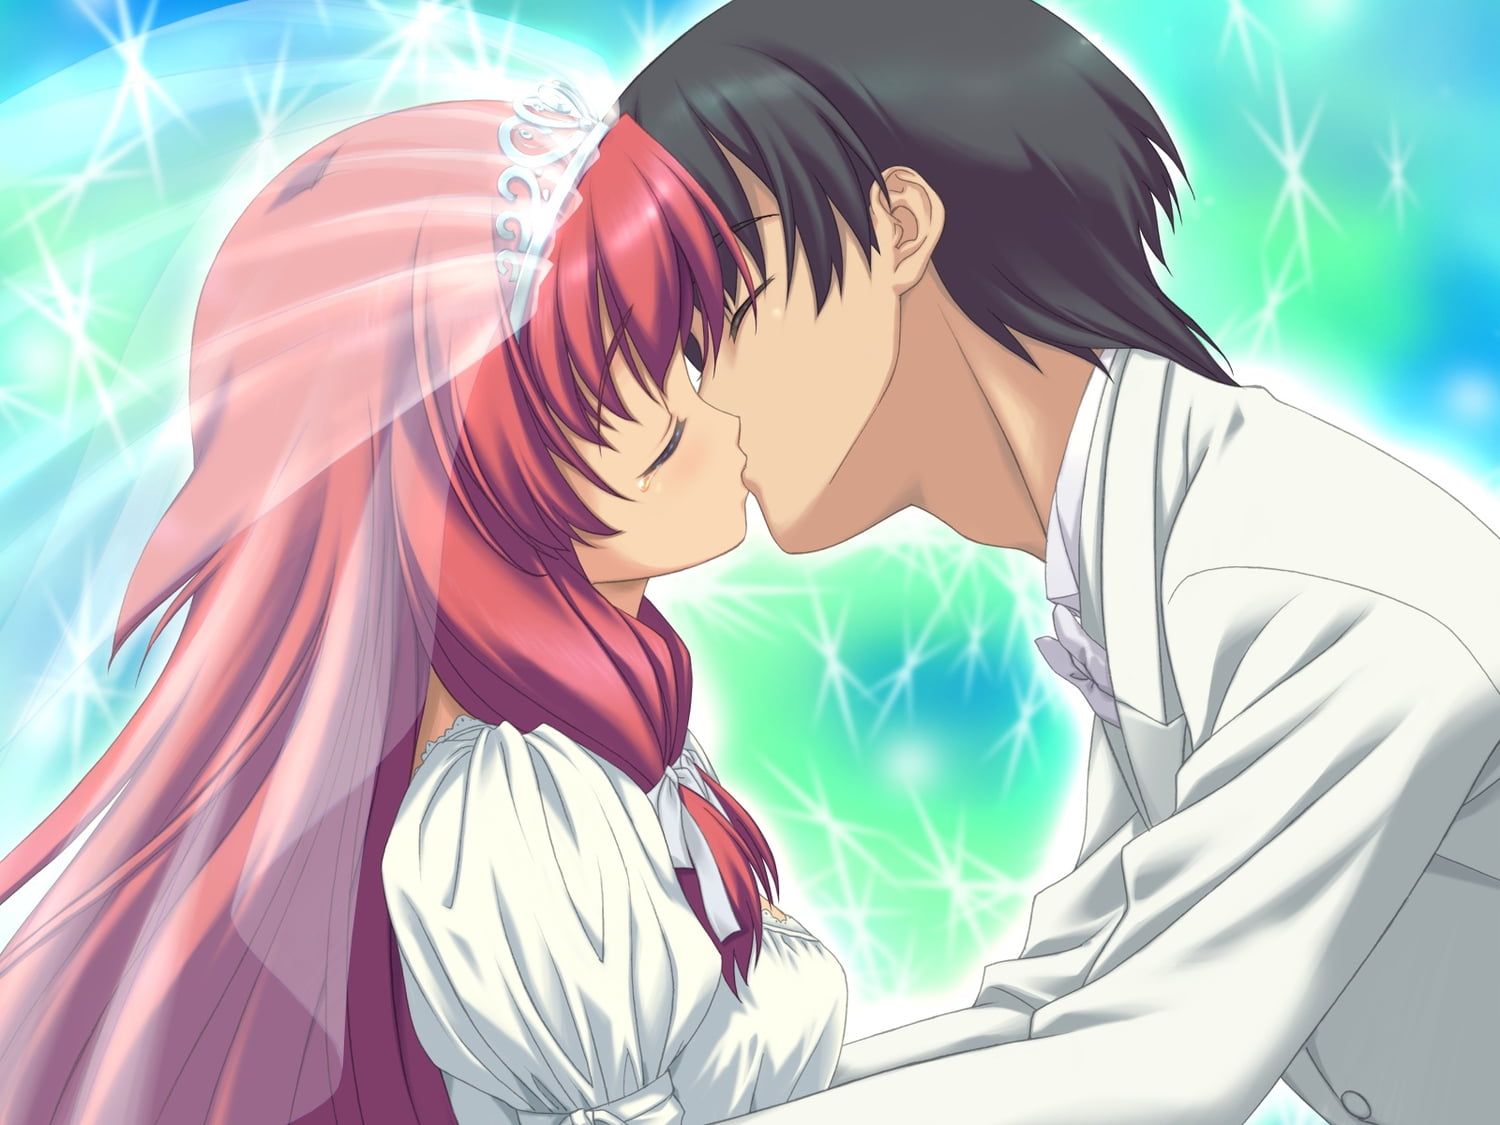 Anime Kissing Pictures posted by Michelle Johnson.